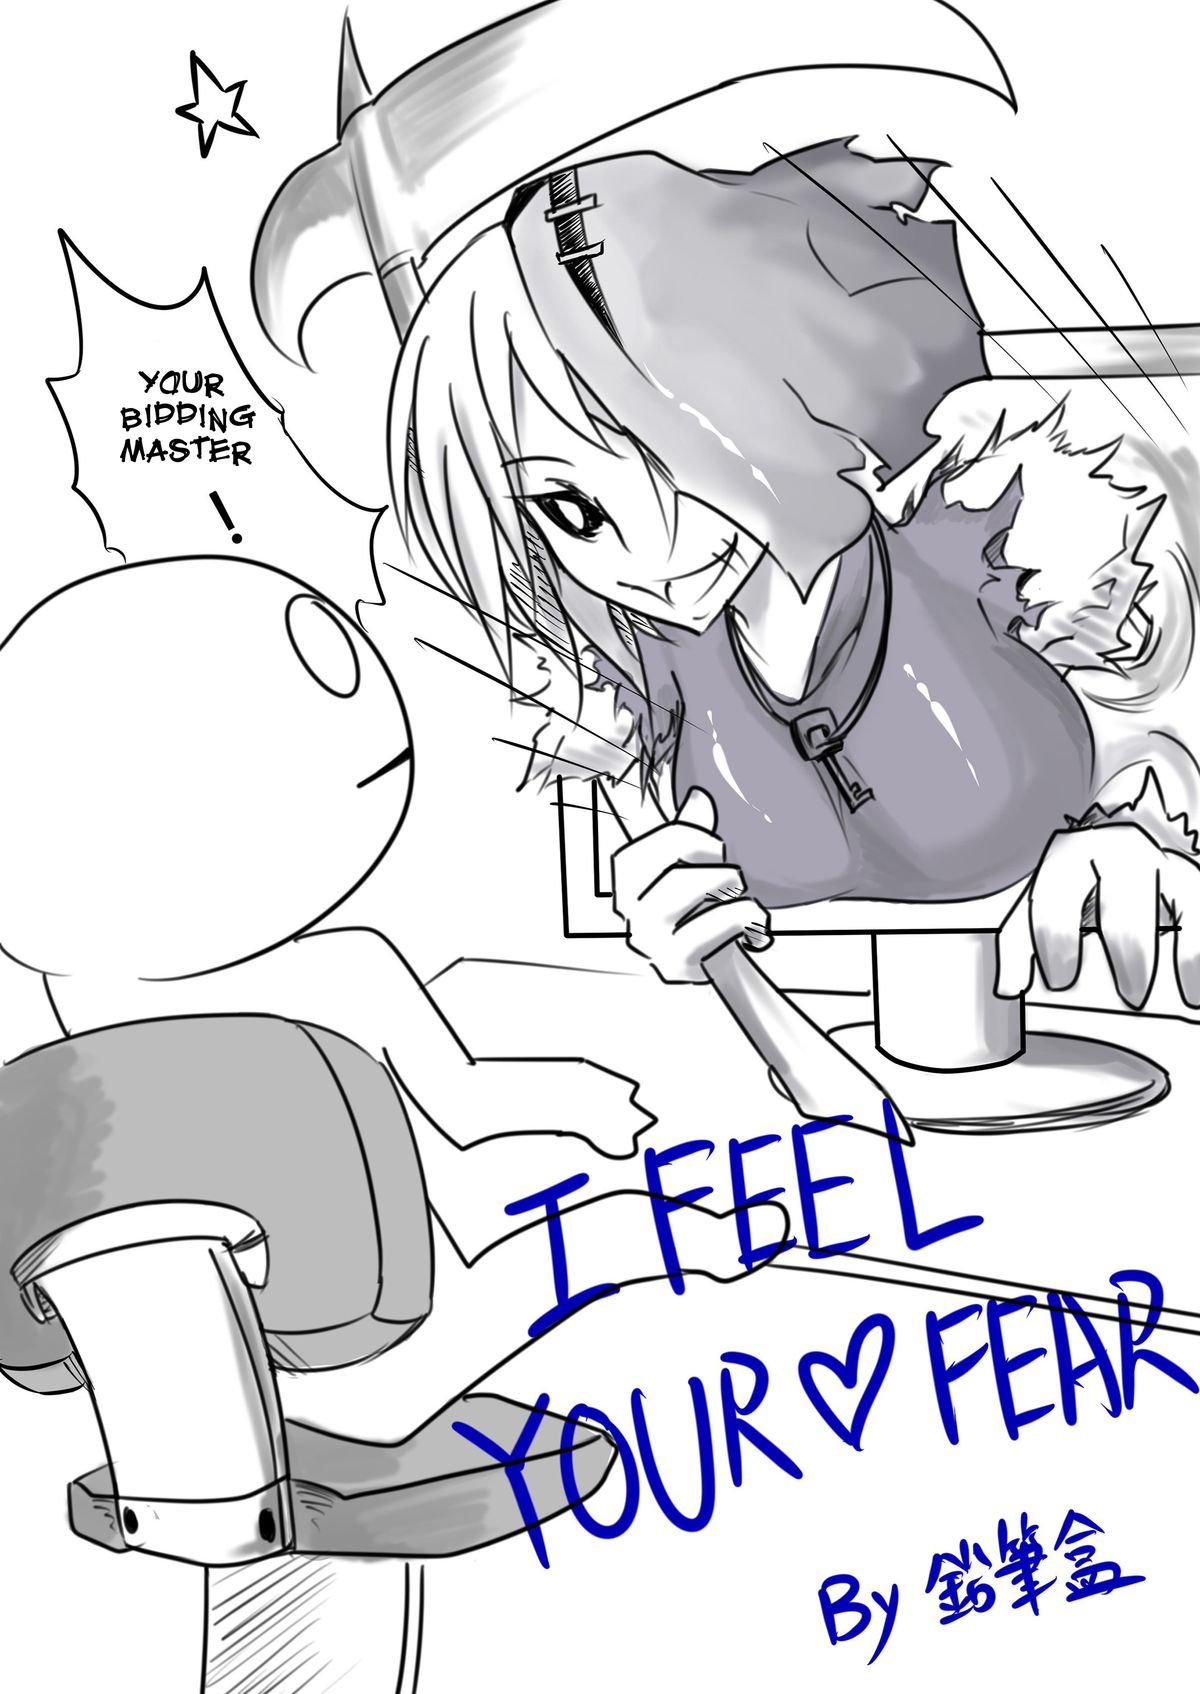 (FF22) [Pencil box] I FEEL YOUR FEAR (League of Legends) [English] page 4 full